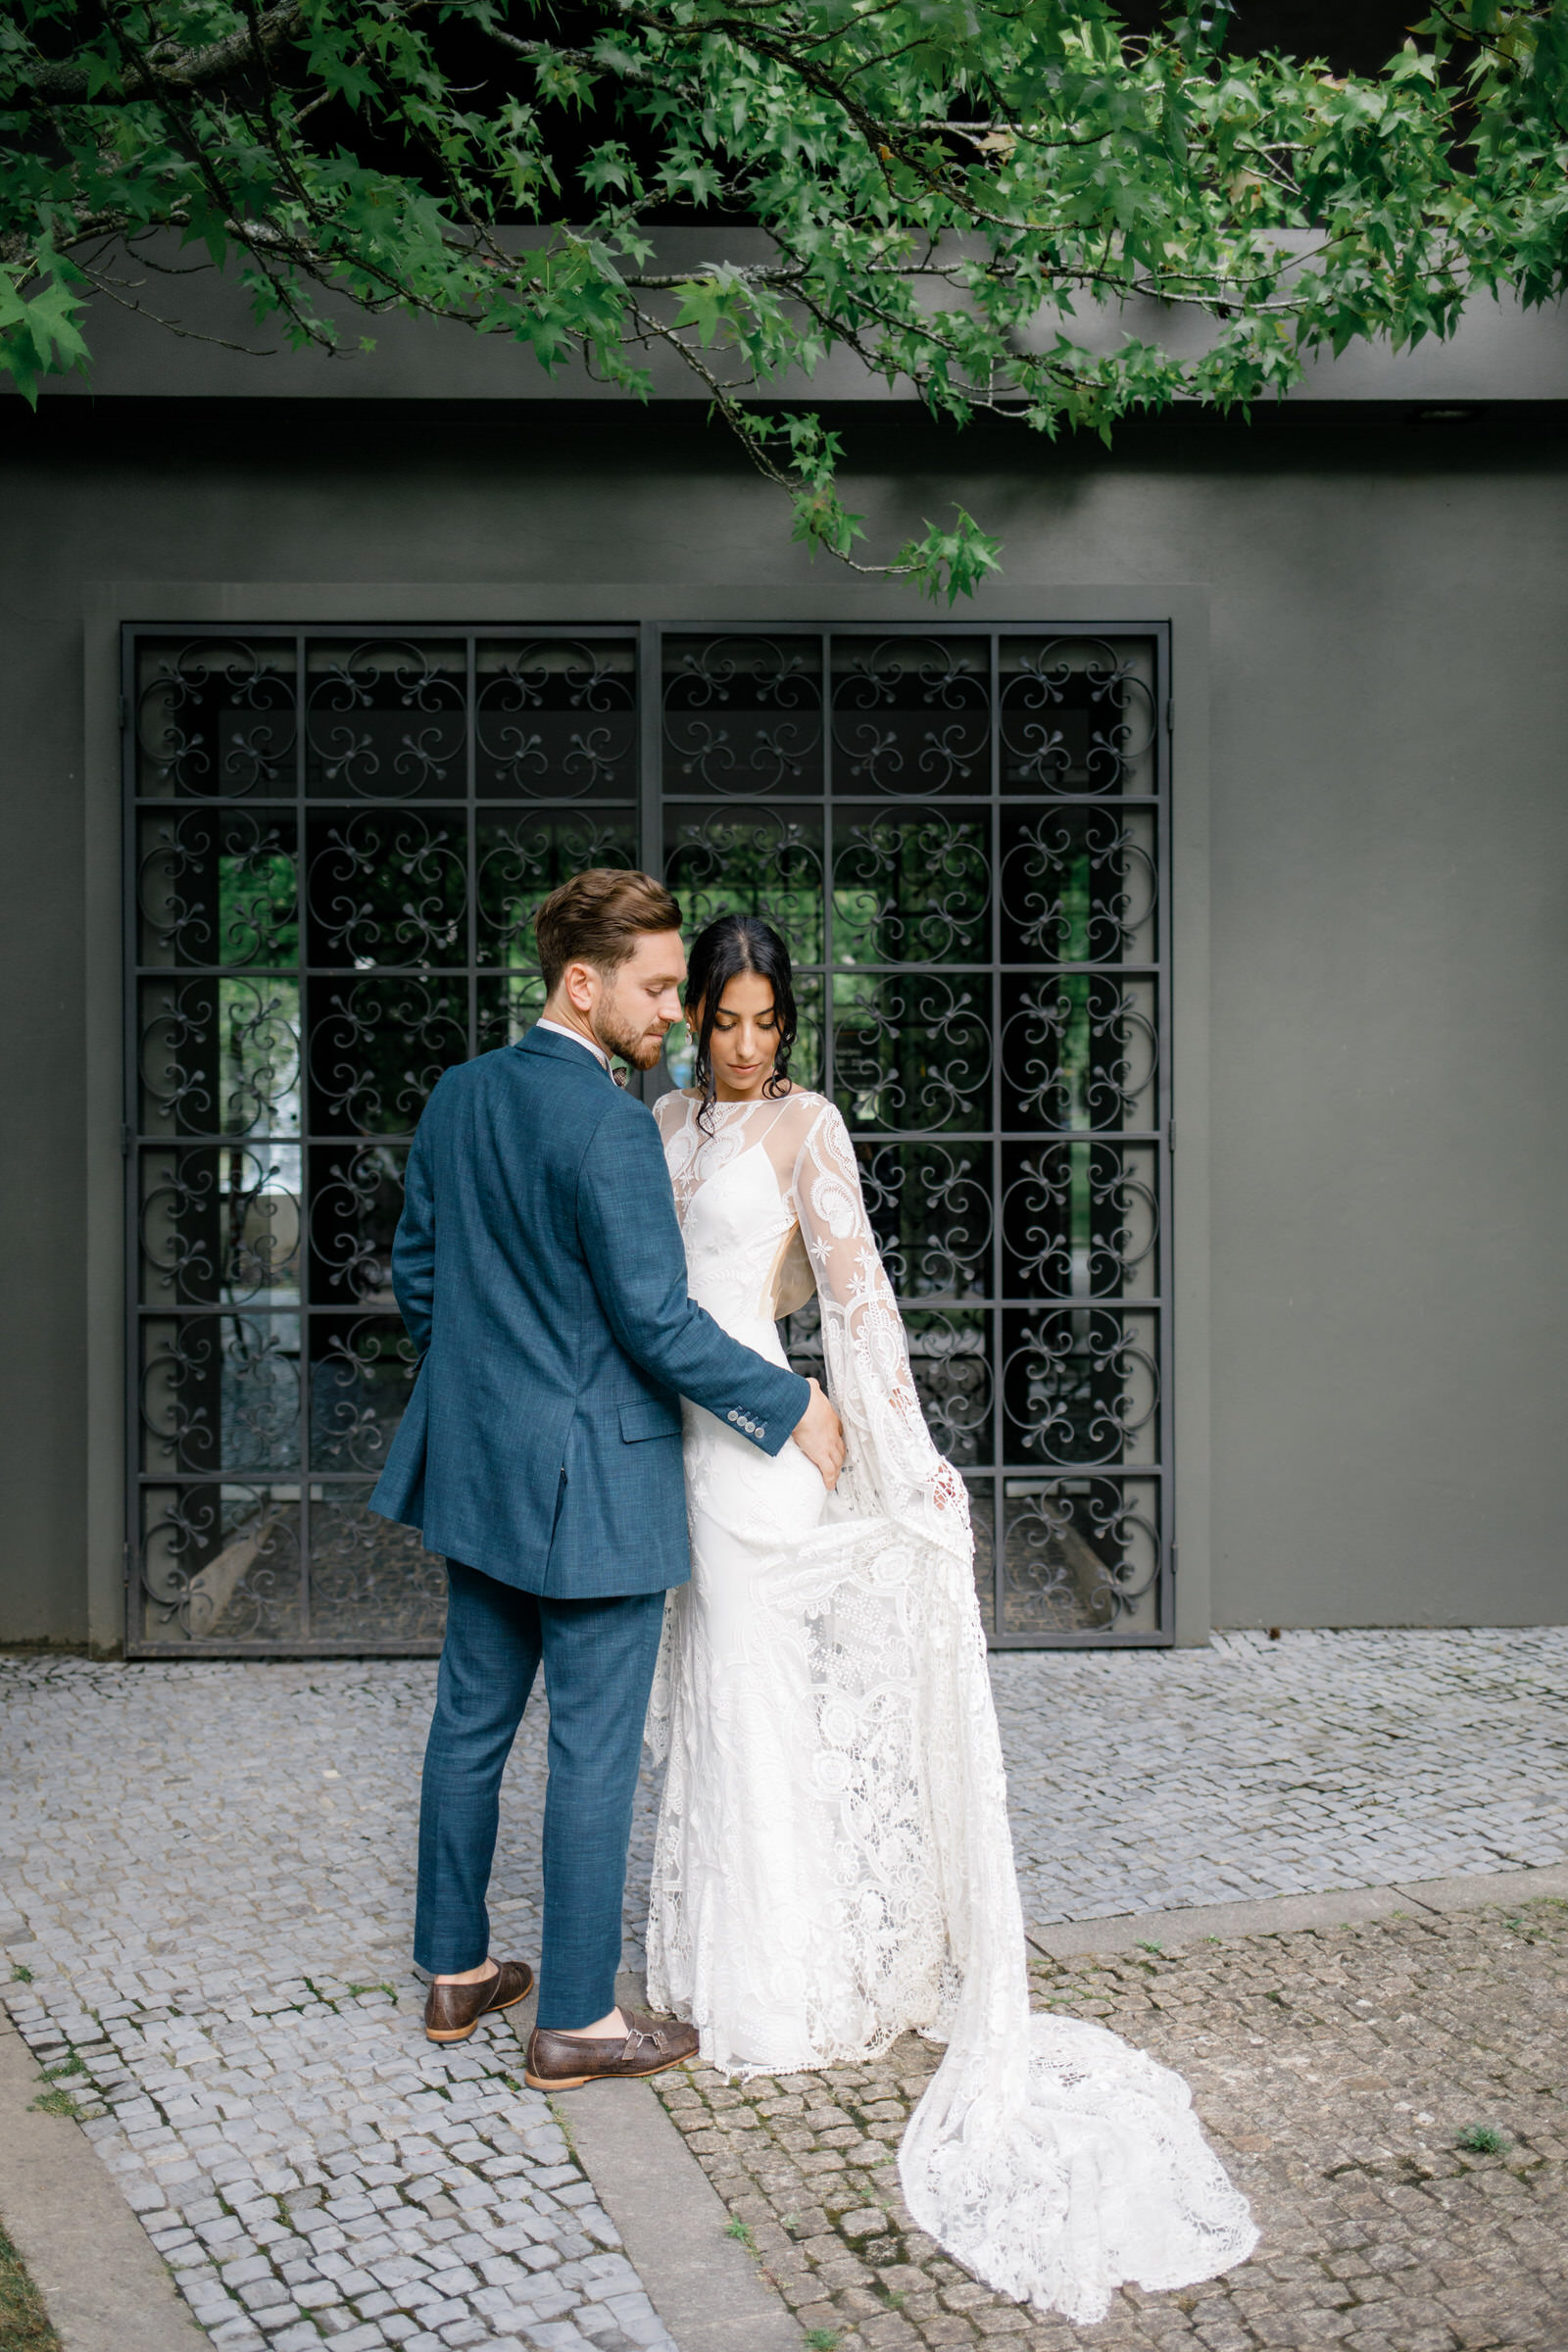 A Modern Bohemian Wedding in Portugal - Over The Moon